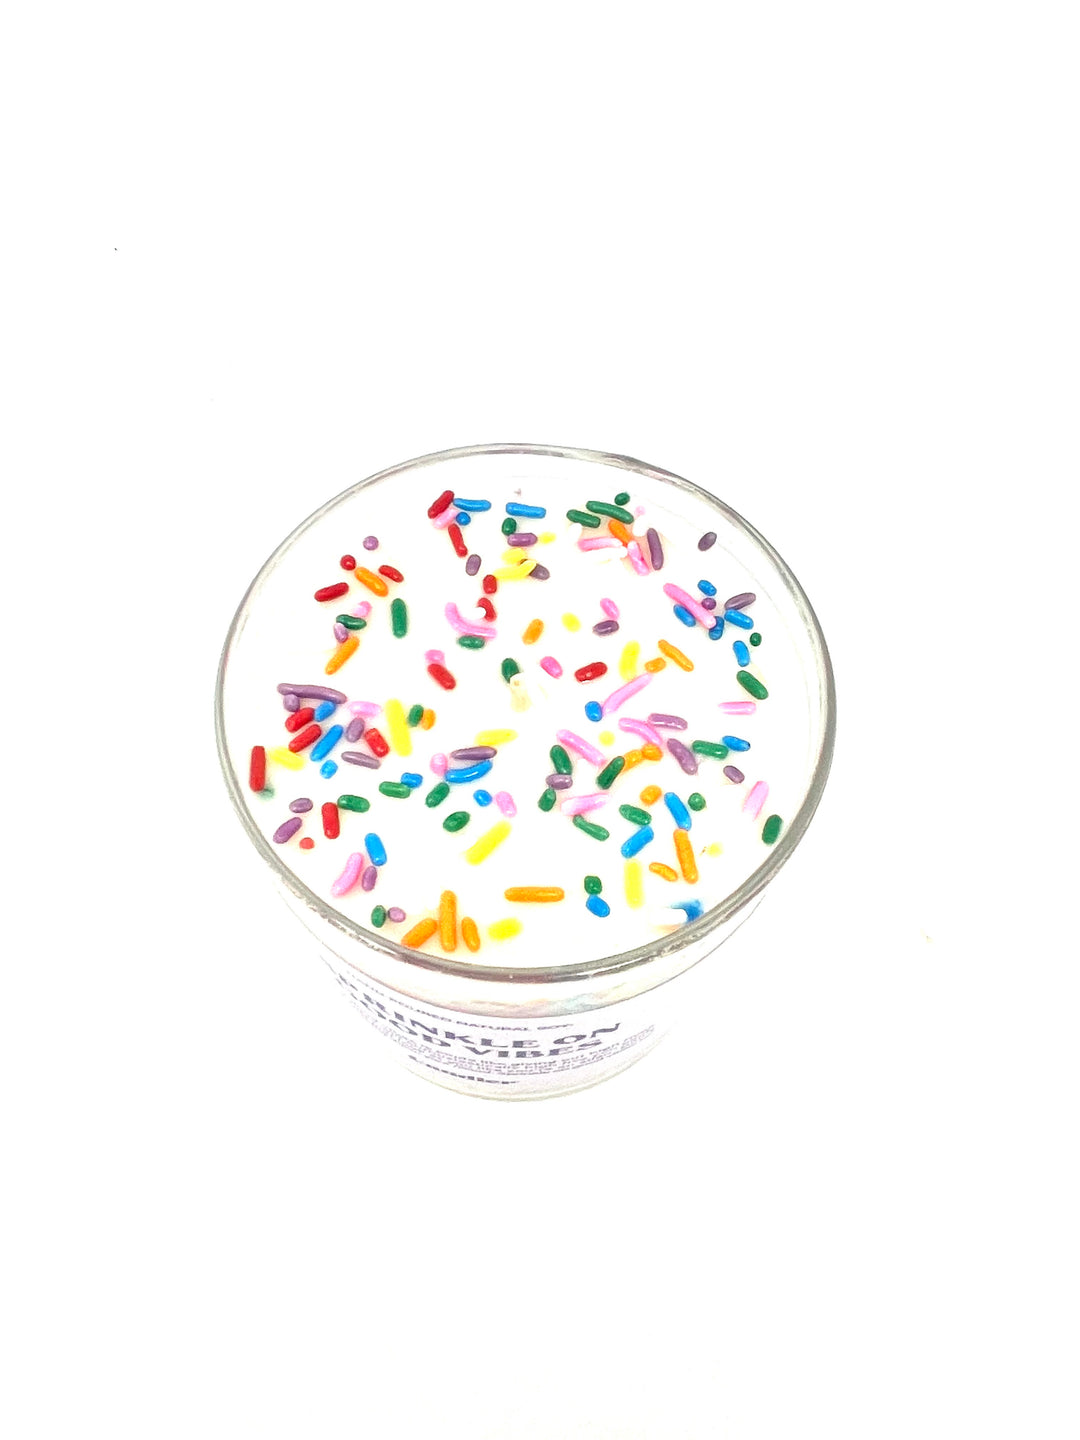 Sprinkle Good Vibes Candle